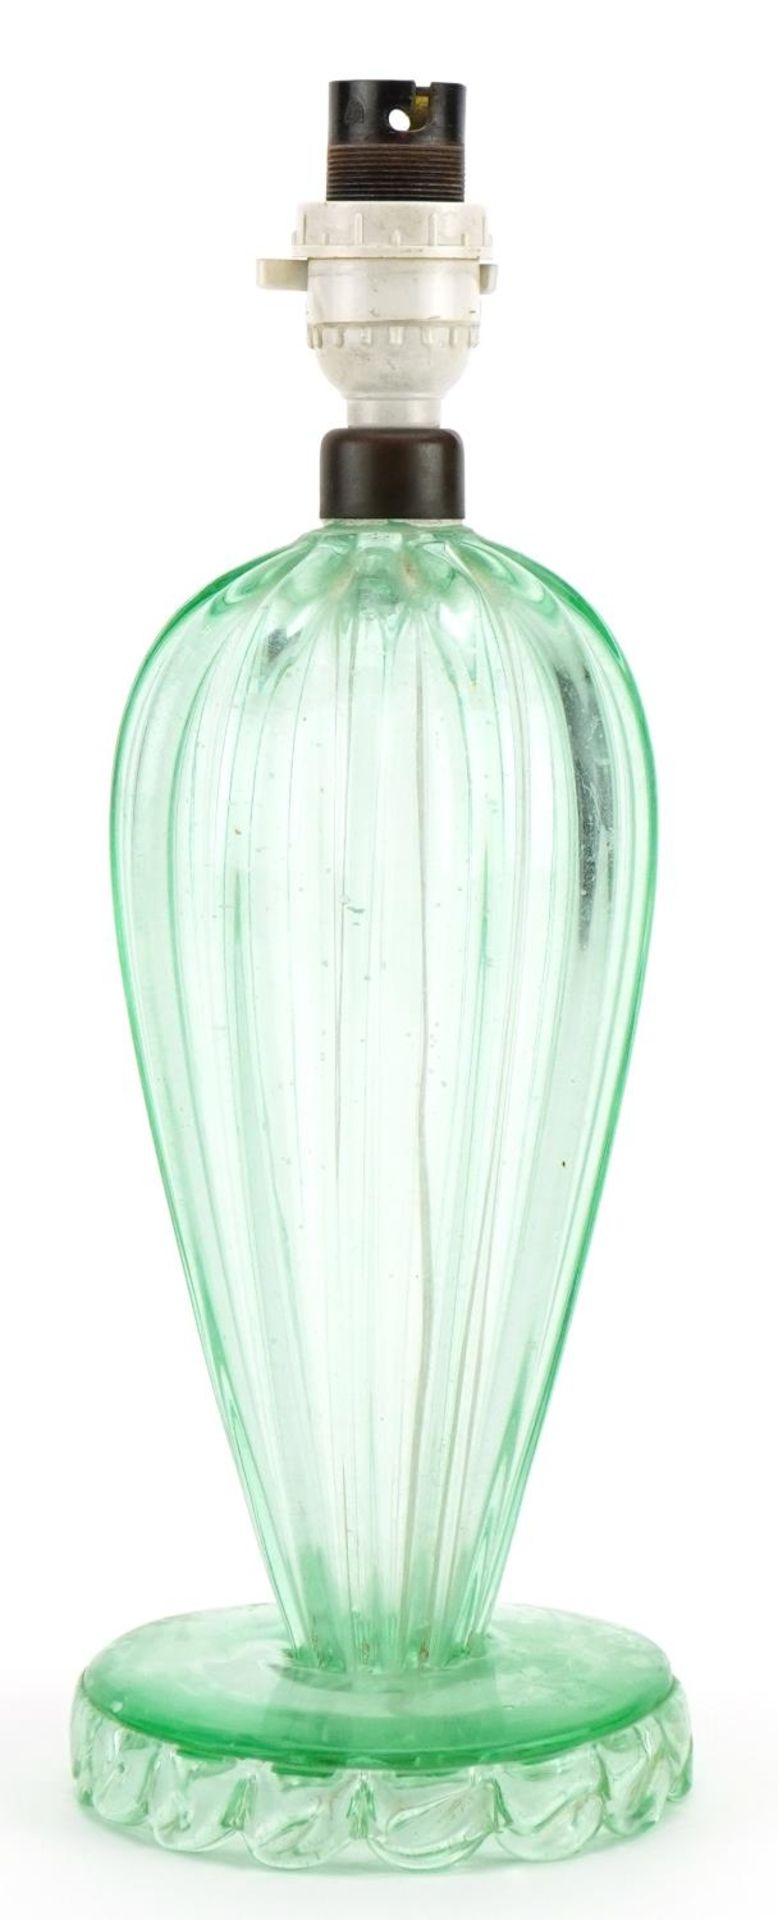 Vintage Murano green glass table lamp, 33.5cm high - Image 2 of 3